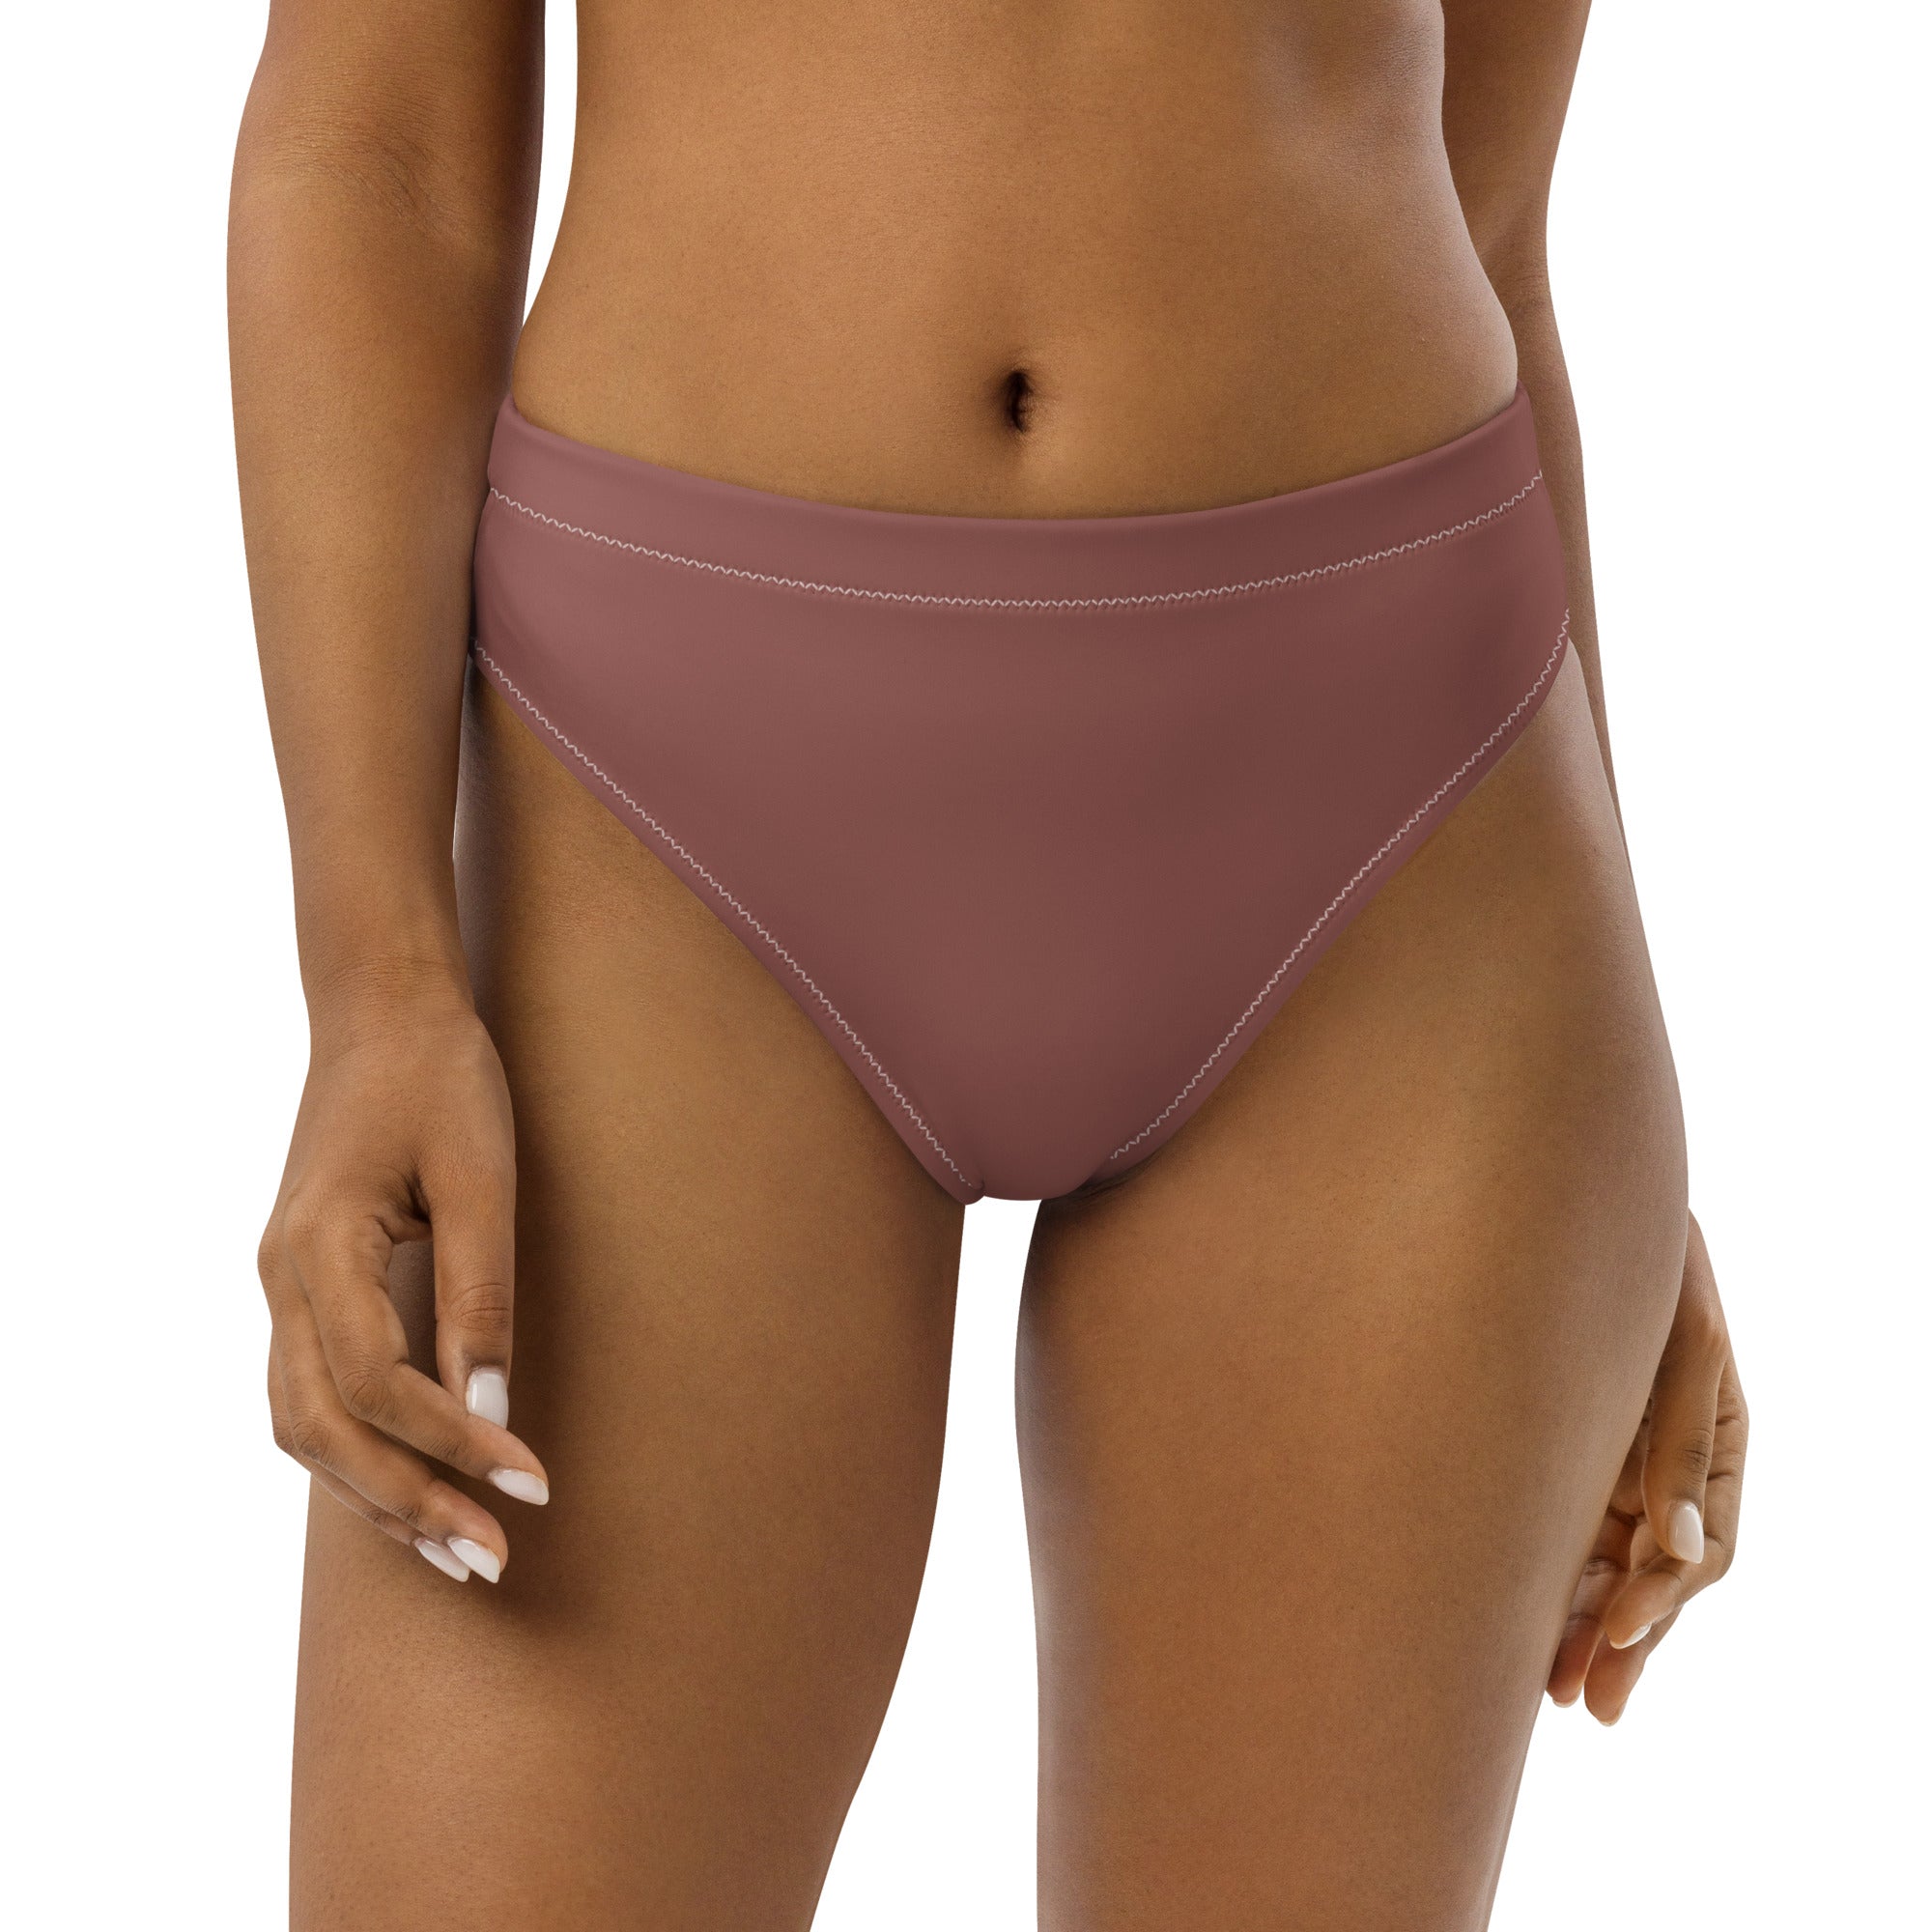 Recycled bikini bottoms in taupe color